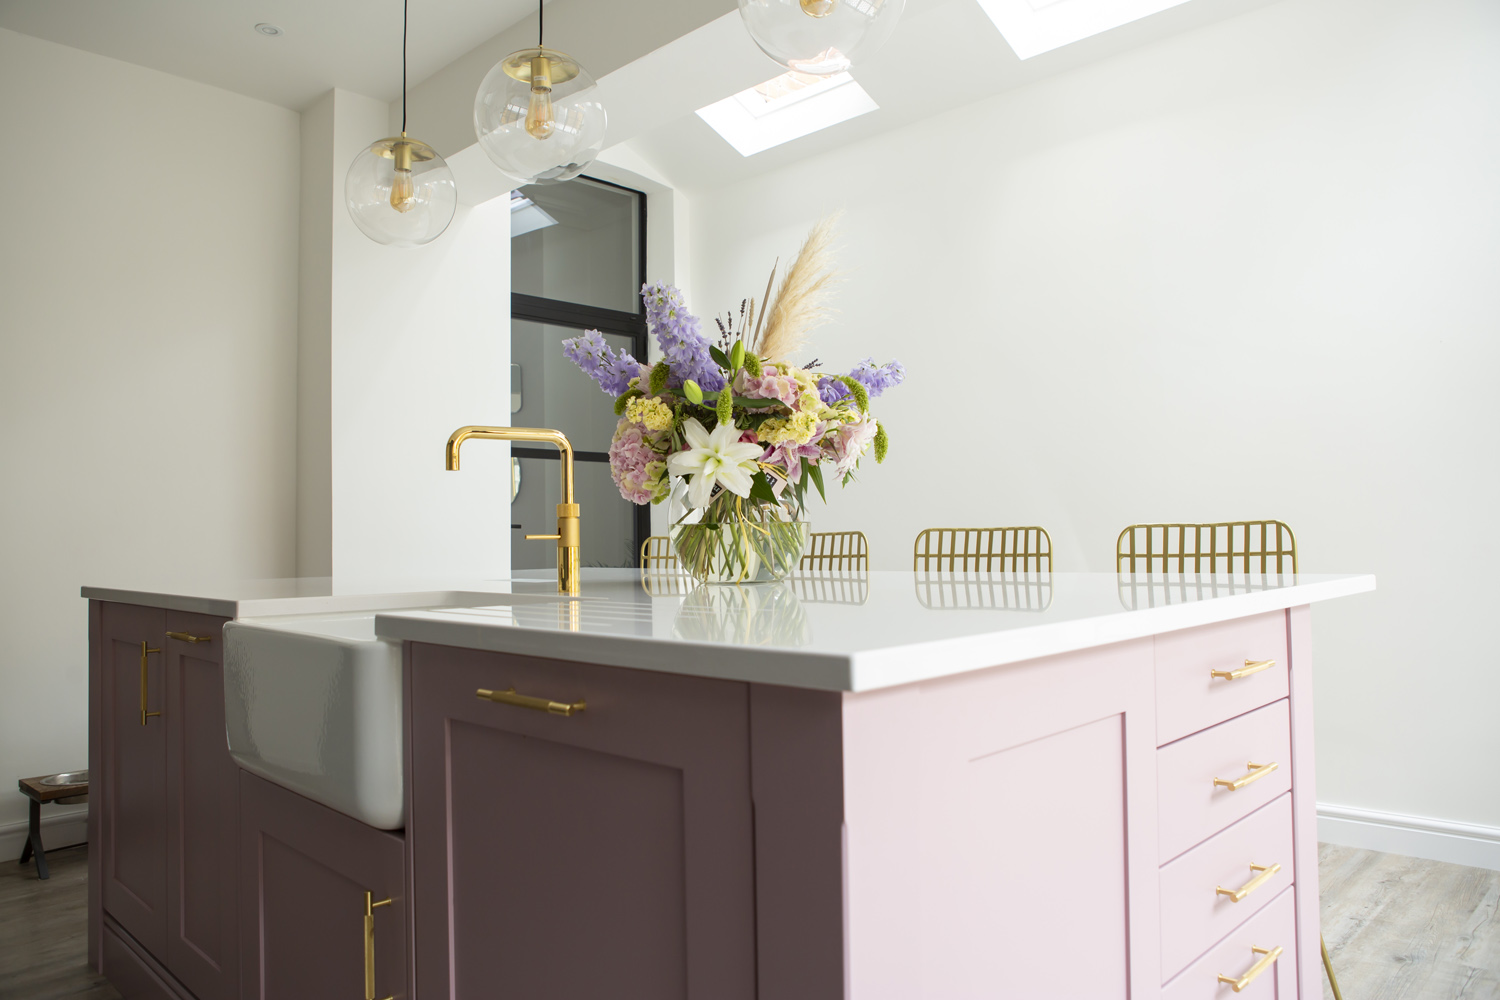 A dusky pink kitchen island from Stoneham Kitchens and Gardiner Haskins Interiors